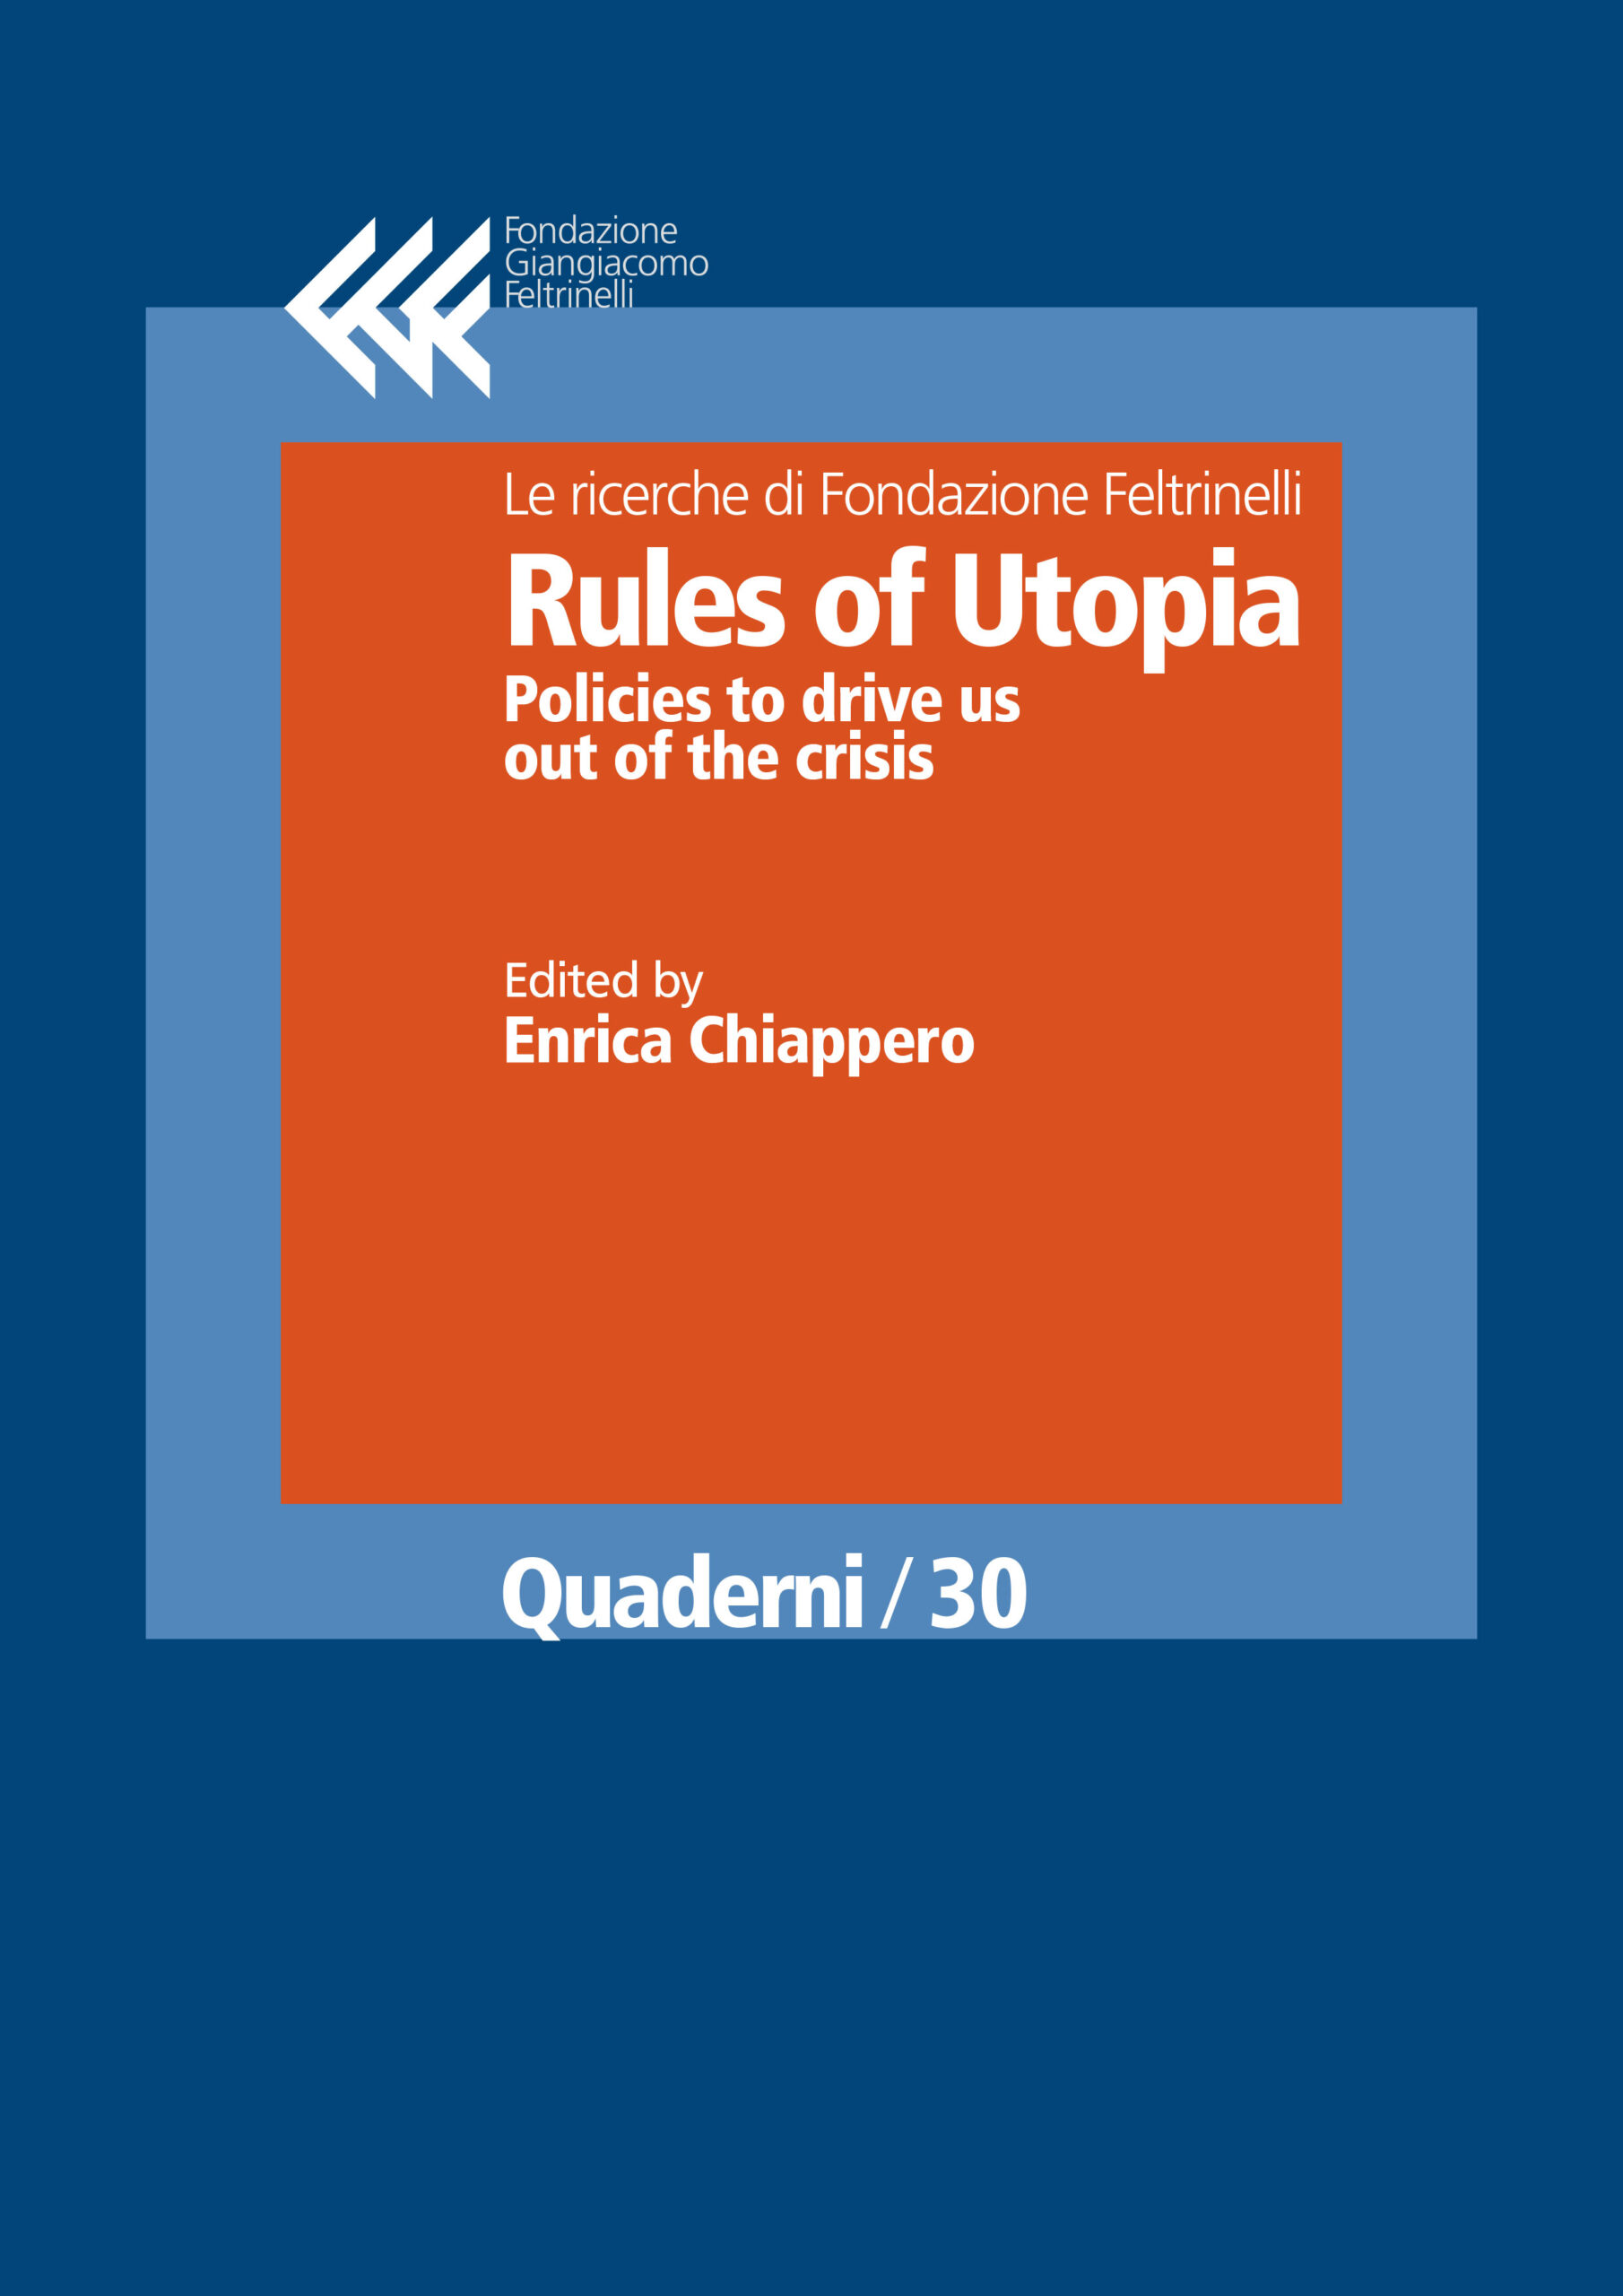 Rules of Utopia
Policies to drive us out of the crisis
